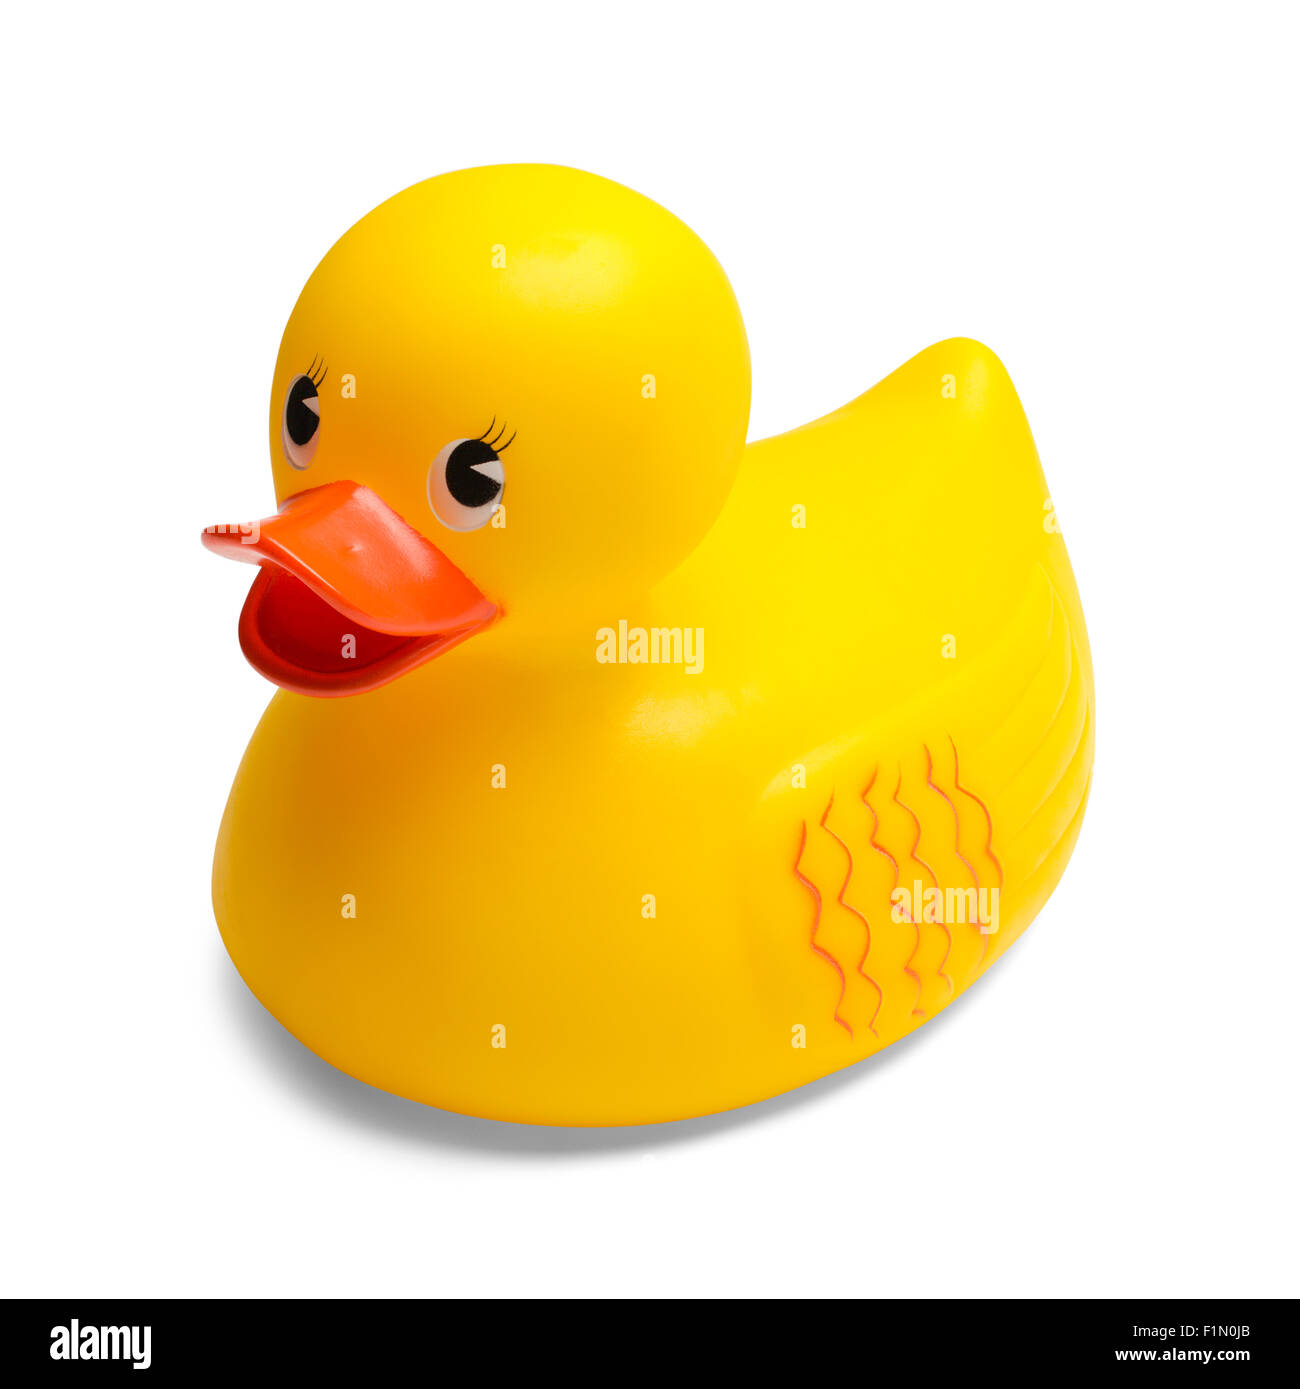 Yellow Rubber Duck Toy Isolated on White Background. Stock Photo